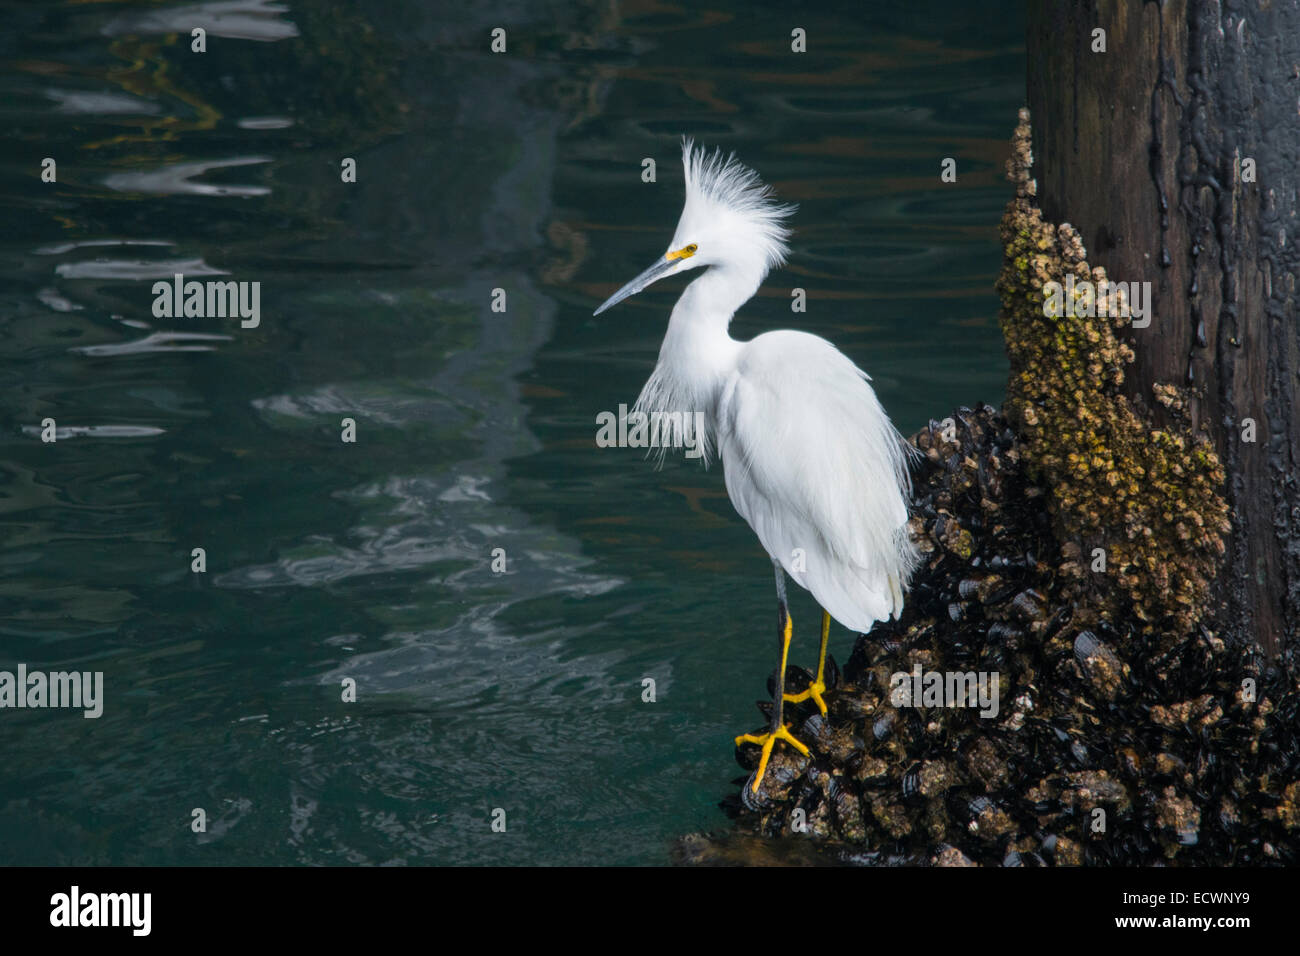 The great egret also known as common egret, large egret or great white heron, is a large, widely distributed egret. Distributed Stock Photo